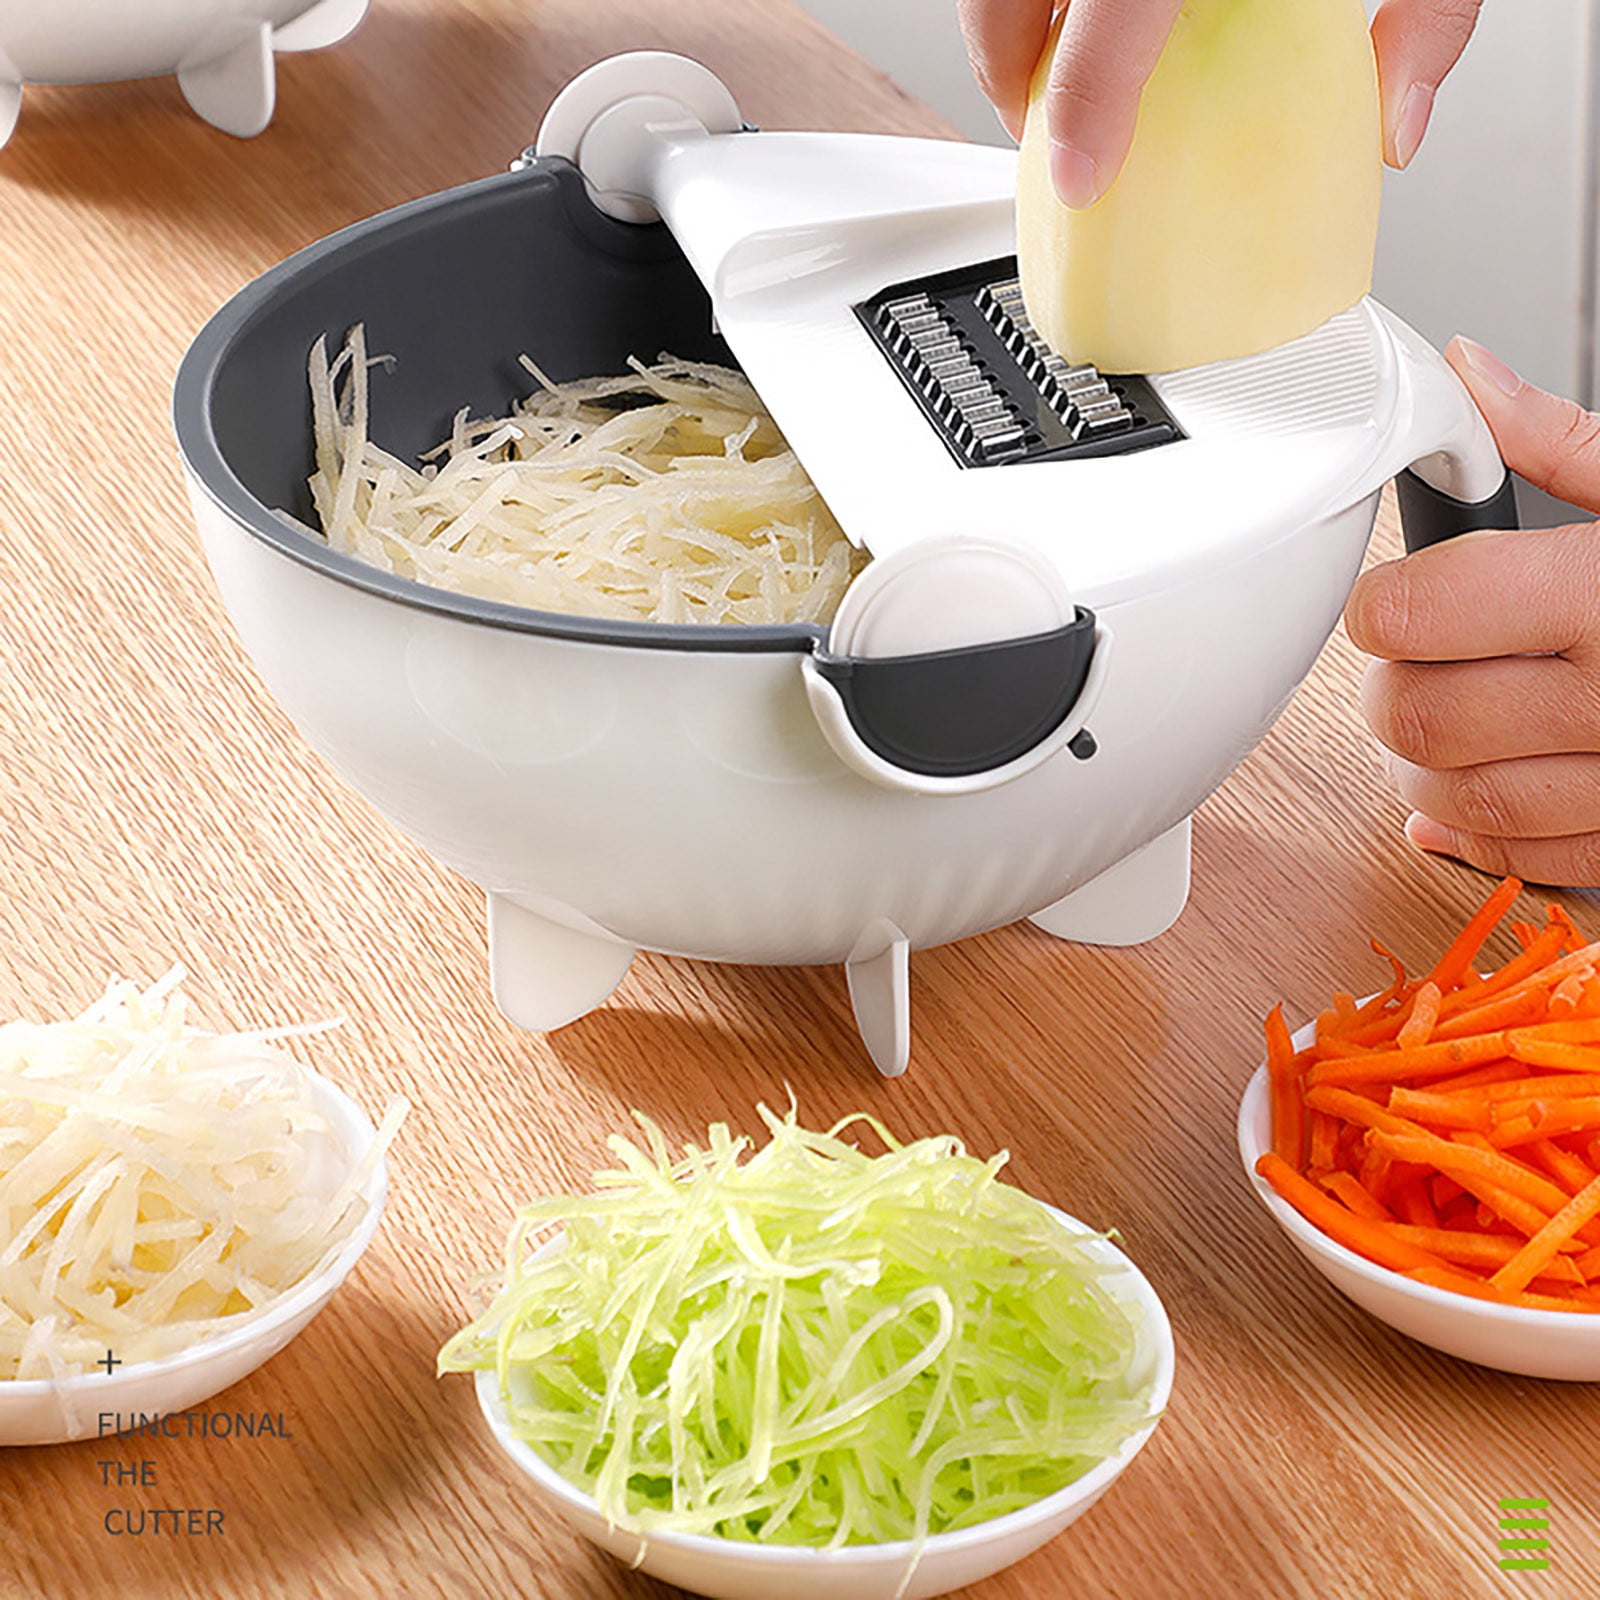 Kqiang New Multifunctional Kitchen Chopping Artifact Vegetable Slicer  Cutter+Container